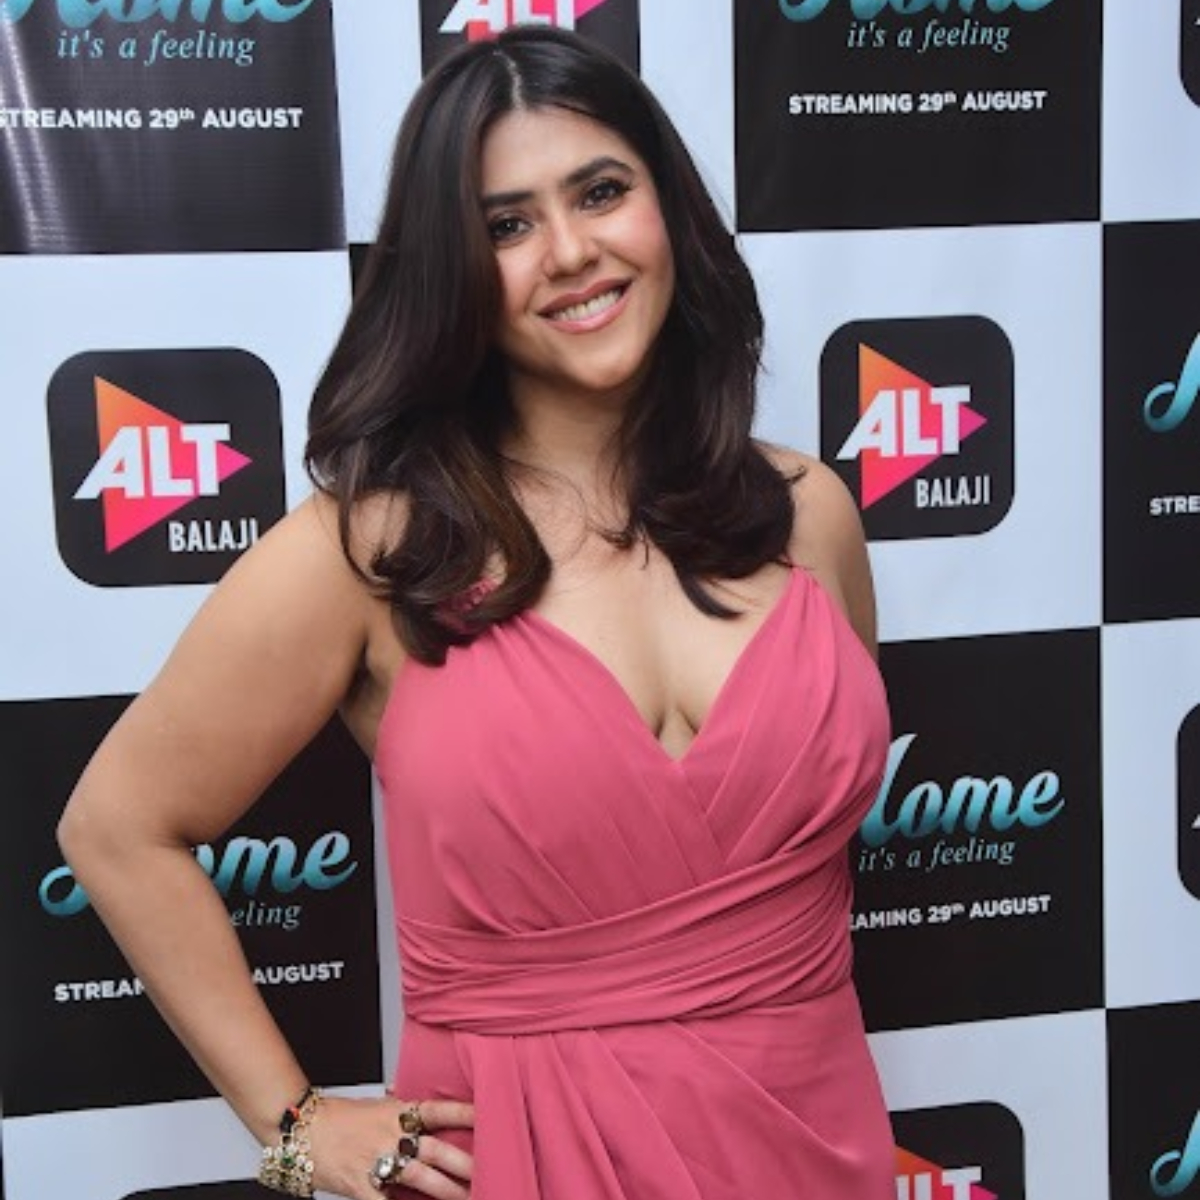 Ekta Kapoor opens up on how the television content has changed over time